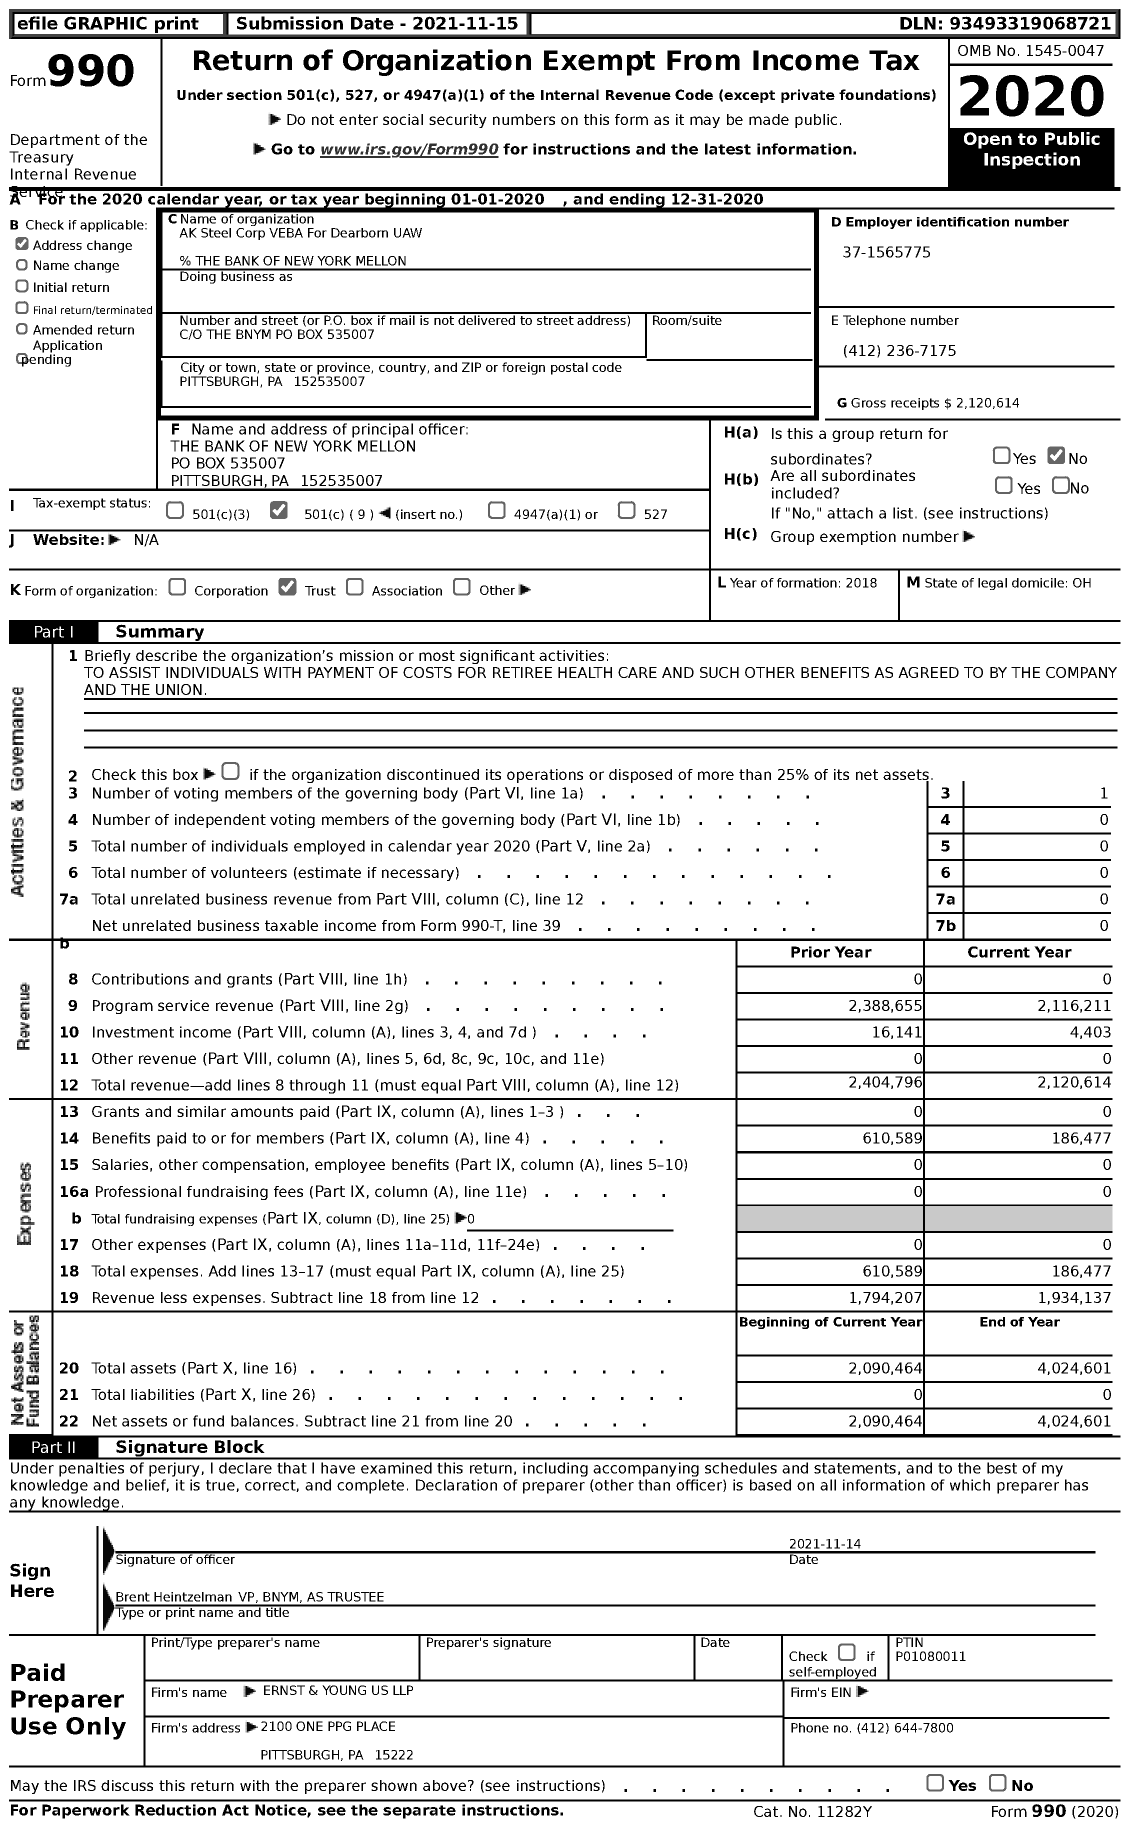 Image of first page of 2020 Form 990 for AK Steel Corp VEBA For Dearborn UAW